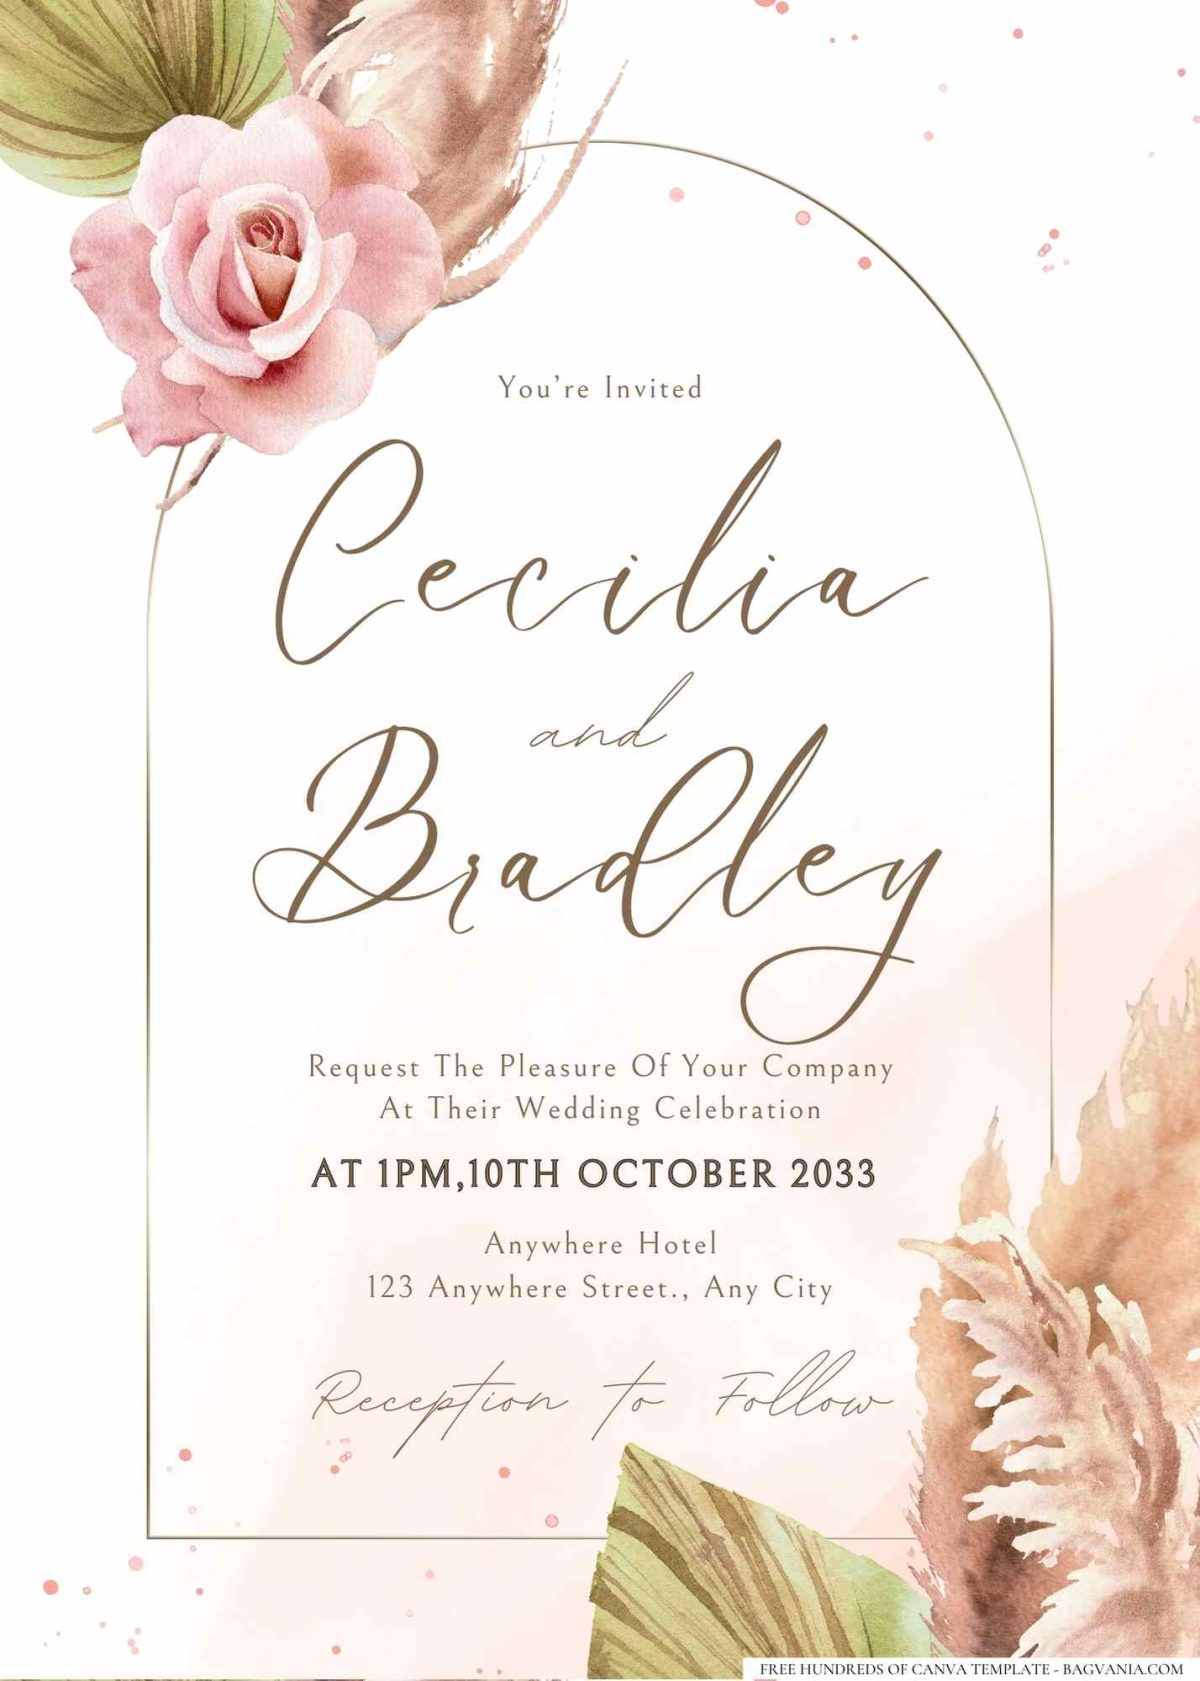 FREE Editable watercolor floral designs in soft pastel hues wedding invitation